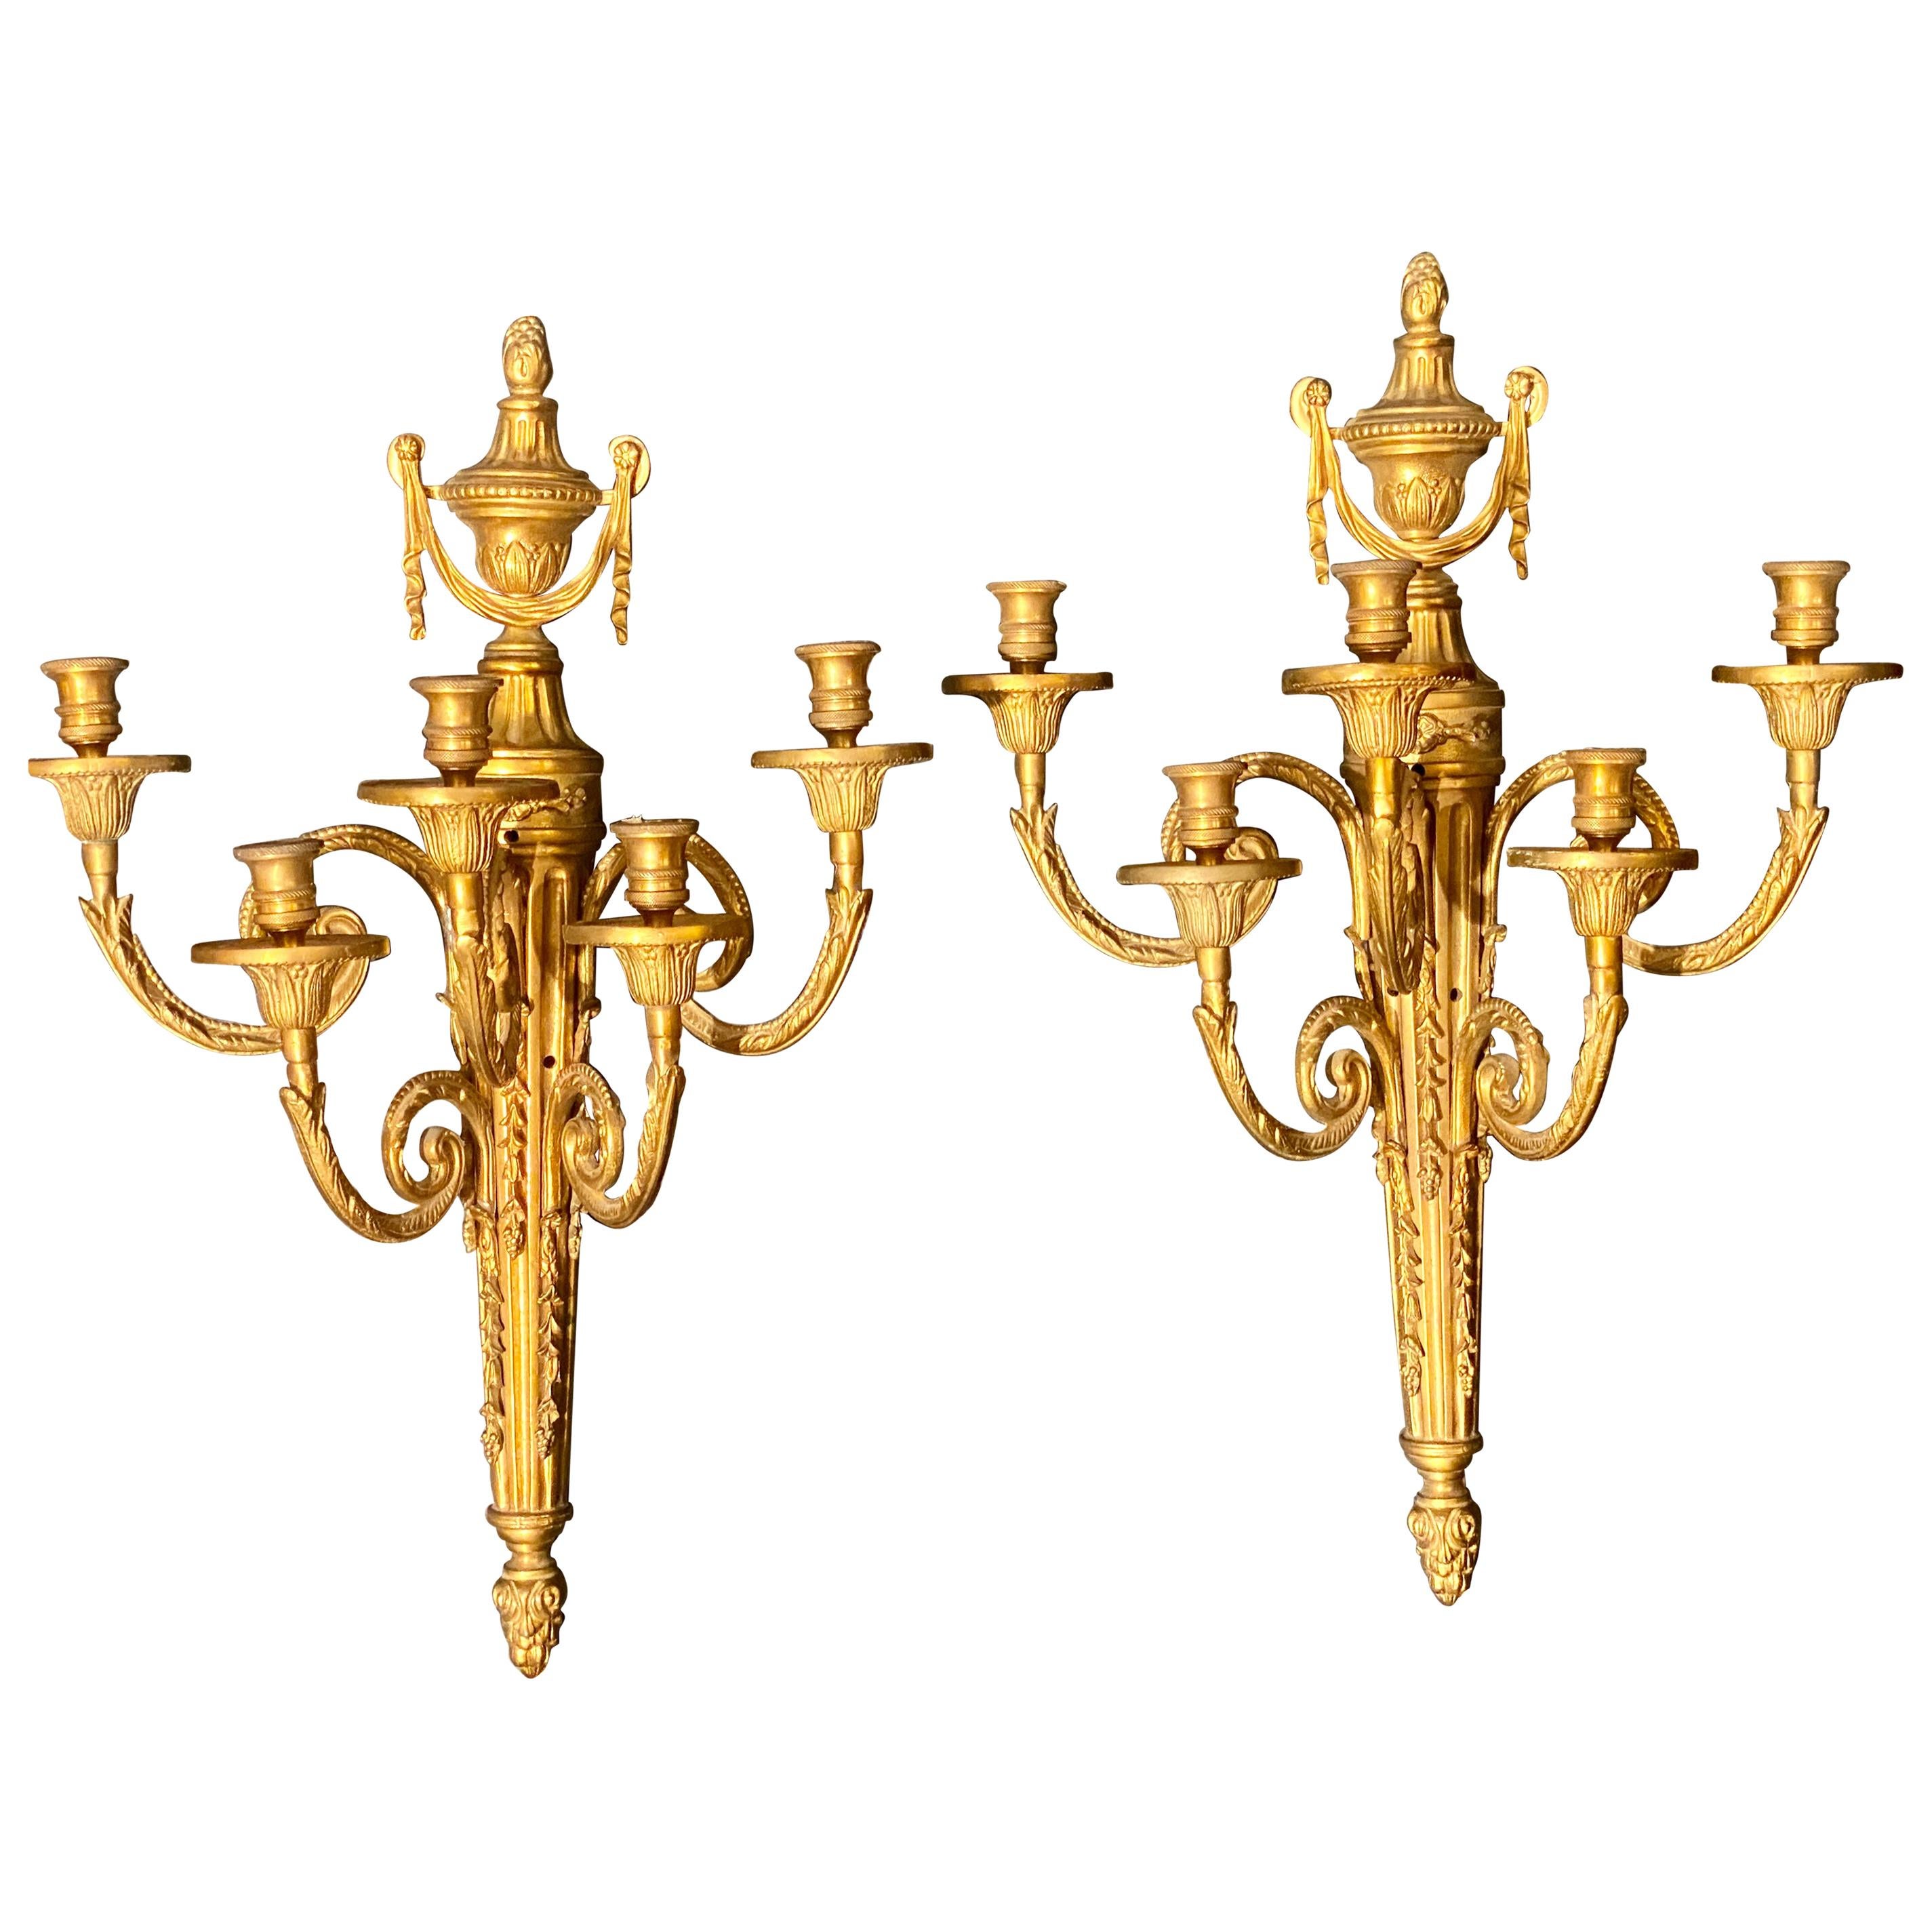 Pair of Adams Style Five Arm Dore Bronze Sconces, Wall Tassel Decorated. Price is for one pair.

